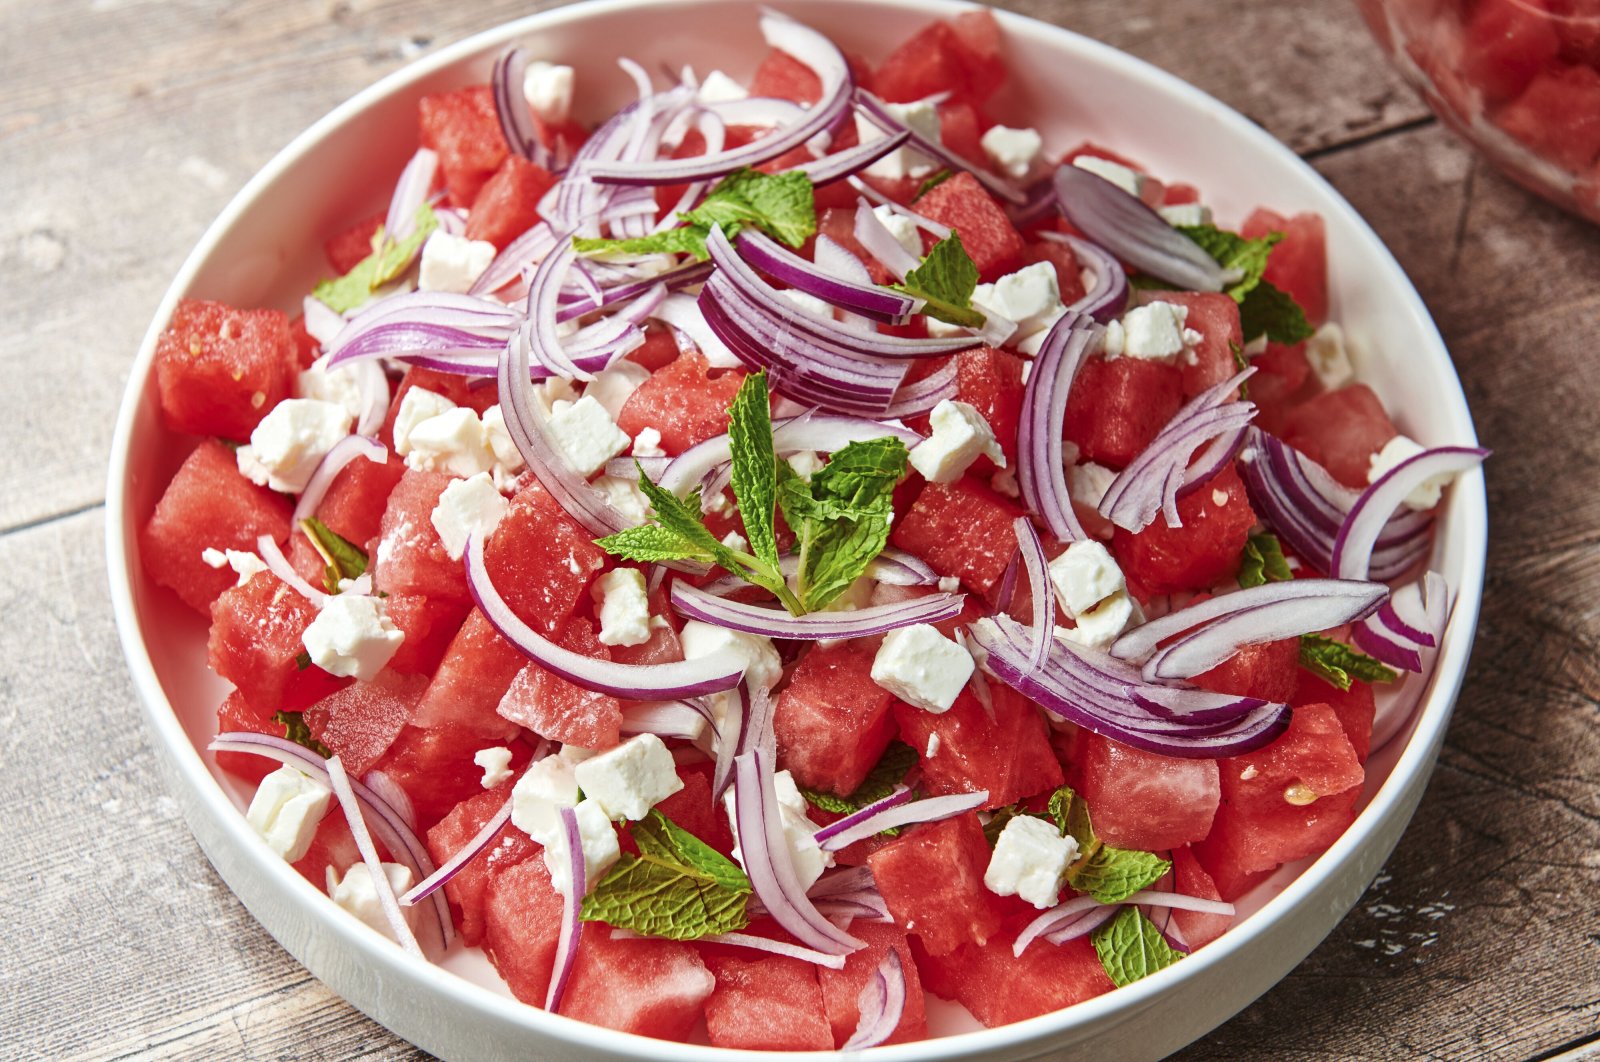 A watermelon feta salad topped with thinly sliced red onion and mint leaves. (AP Photo)